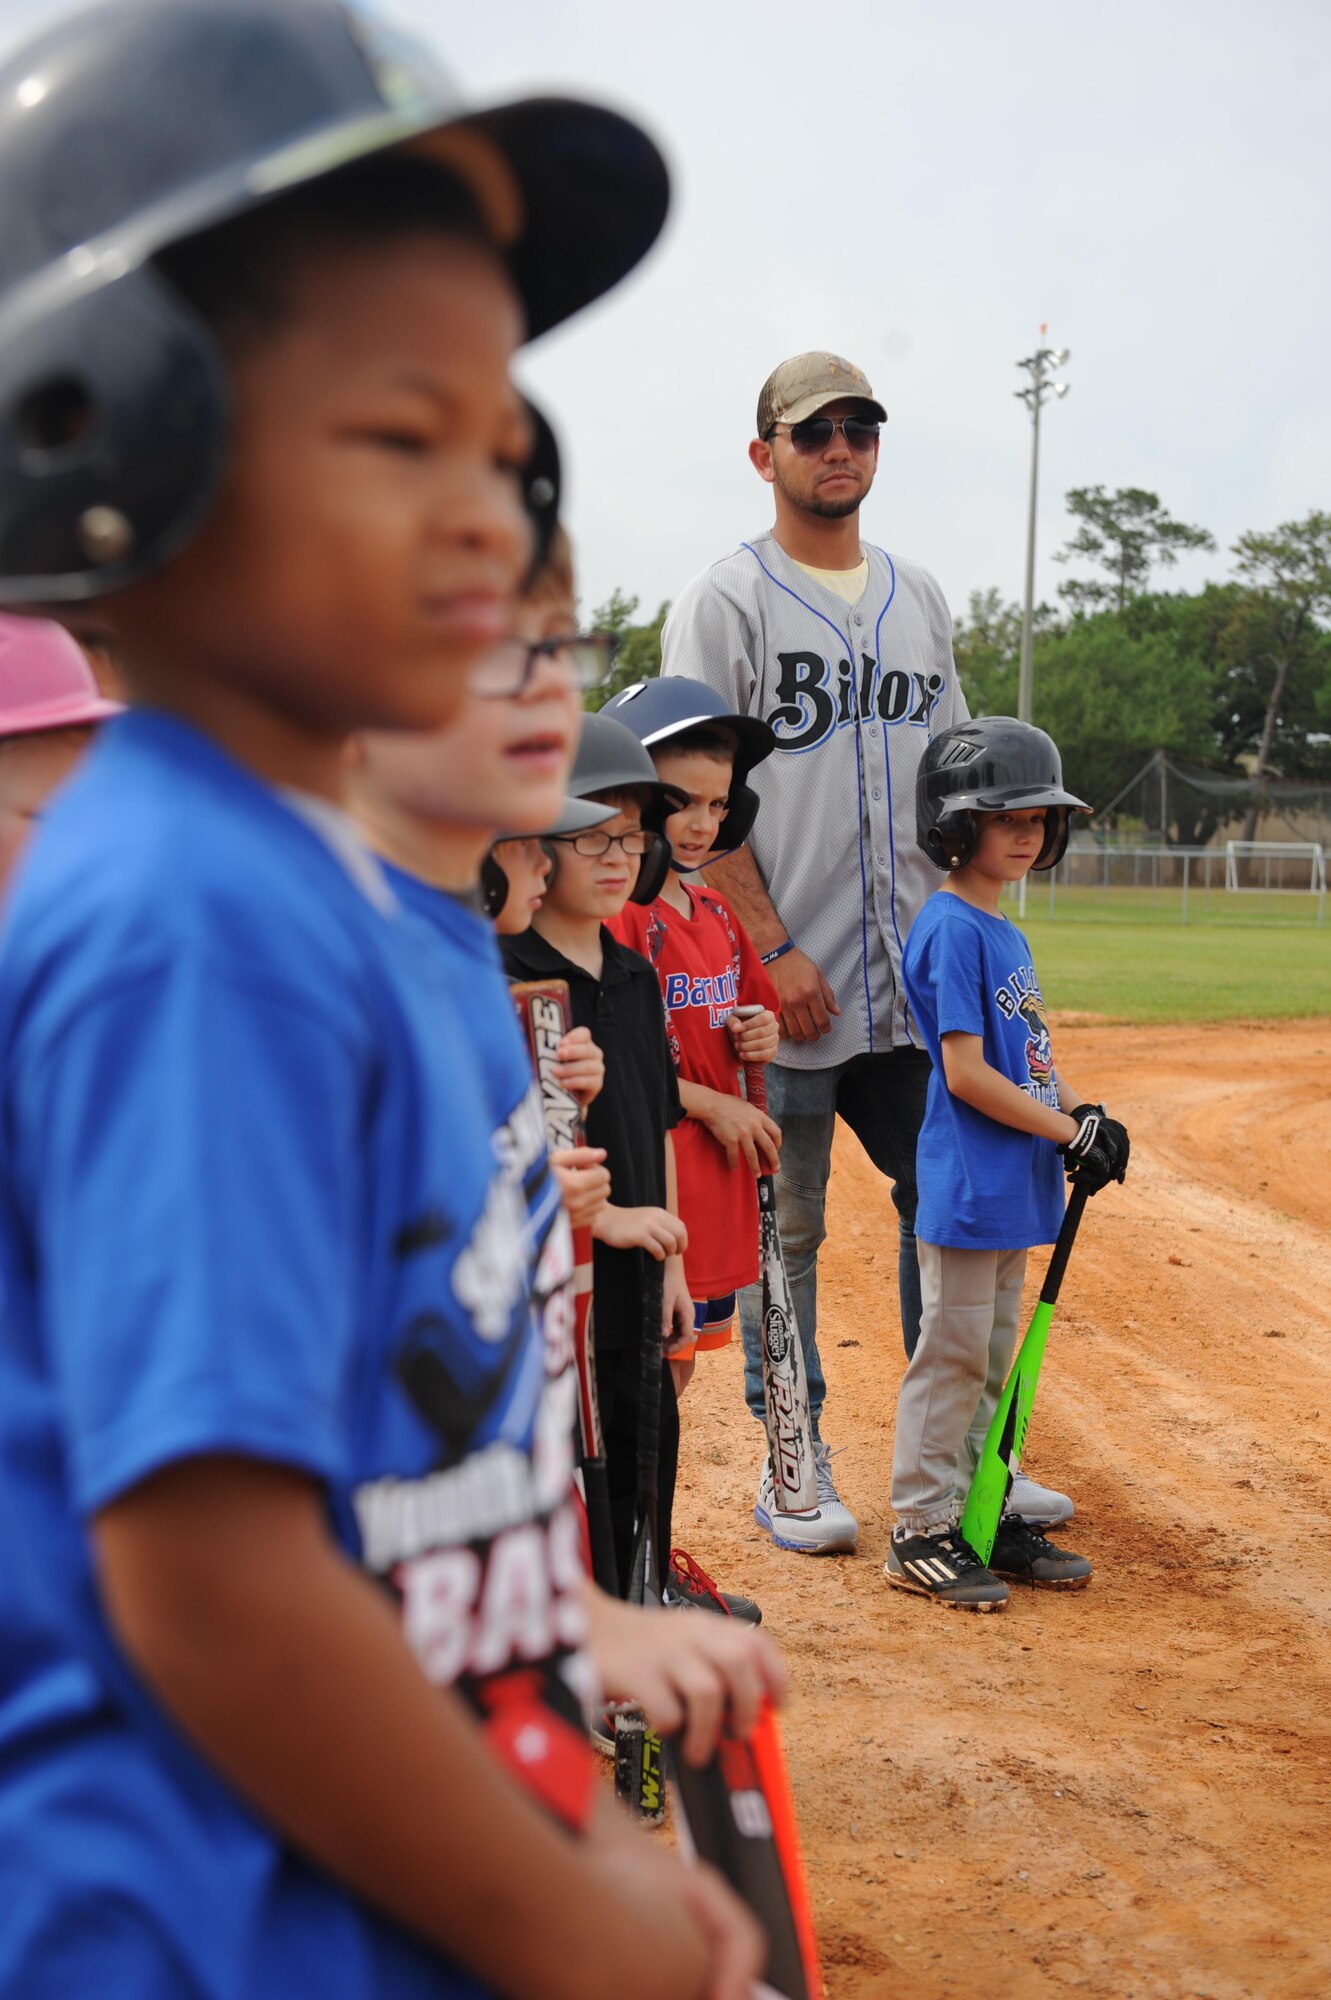 Javier Betancourt, Biloxi Shuckers second baseman, stands with Keesler children before swinging practice during the Biloxi Shucker’s Youth Baseball Clinic at the youth center baseball field April 30, 2016, Keesler Air Force Base, Miss. The clinic provided hitting, pitching, base running and fielding instruction from members of the Biloxi Shucker’s minor league baseball team. (U.S. Air Force photo by Kemberly Groue)